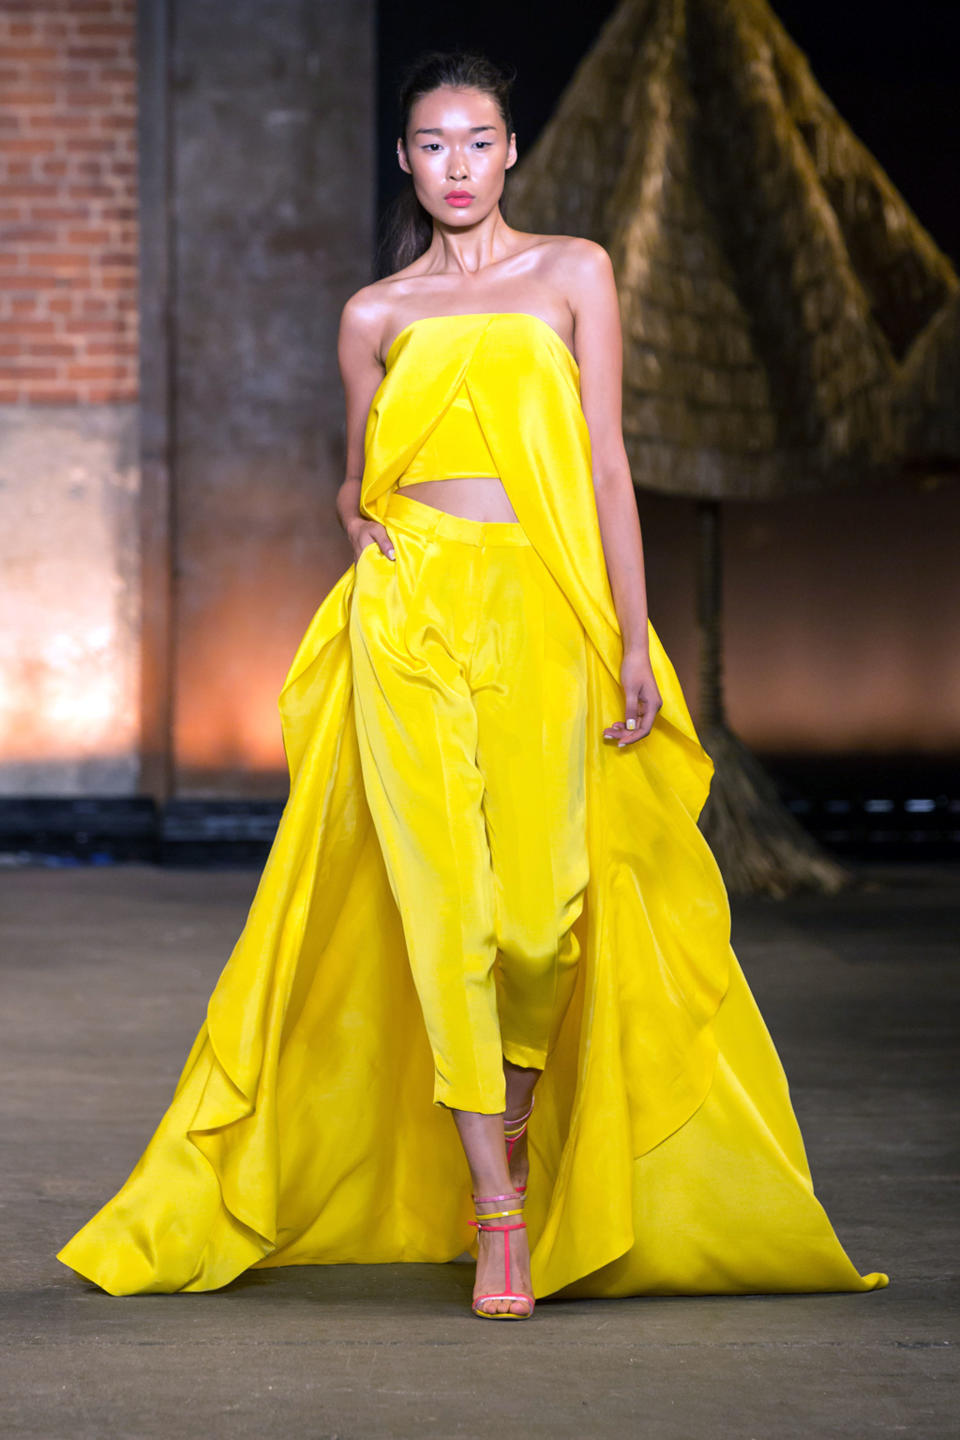 In this Saturday, Sept. 7, 2013, photo, provided by Christian Siriano, fashion from the Christian Siriano Spring 2014 collection is modeled during Fashion Week in New York. (AP Photo/Christian Siriano)